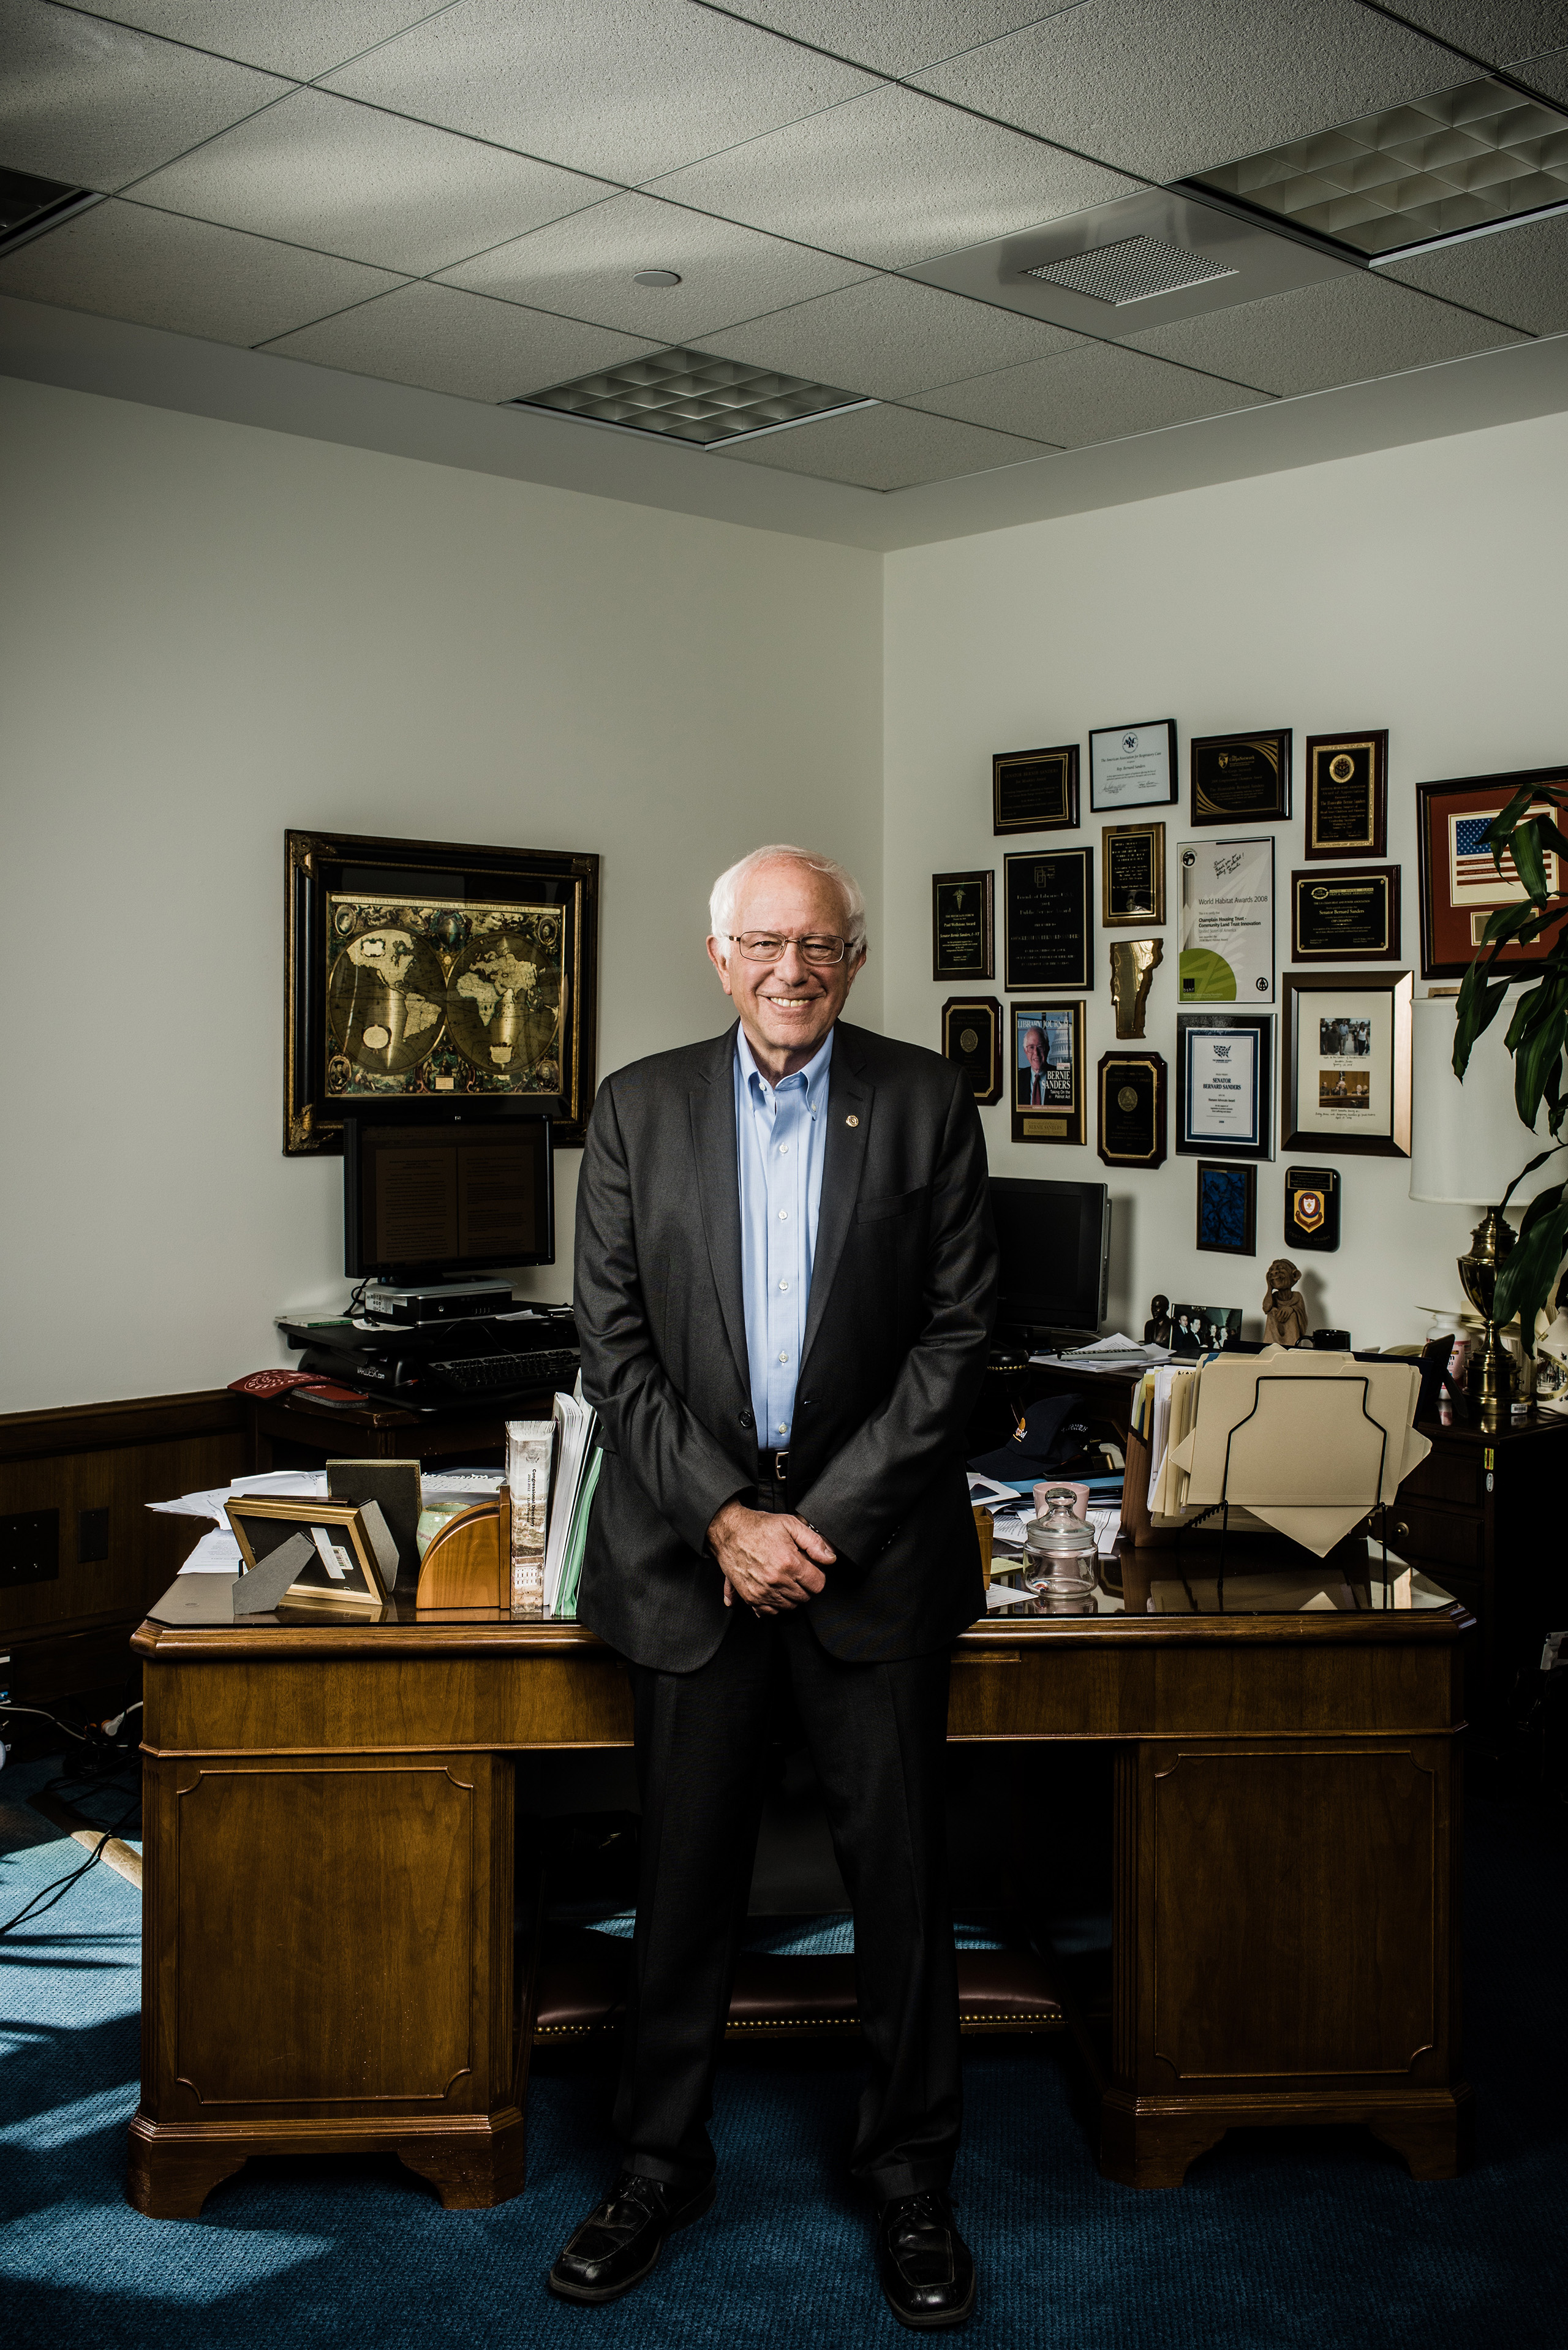 The surging presidential candidate on Sept. 15 in his Washington Senate office. (Stephen Voss for TIME)